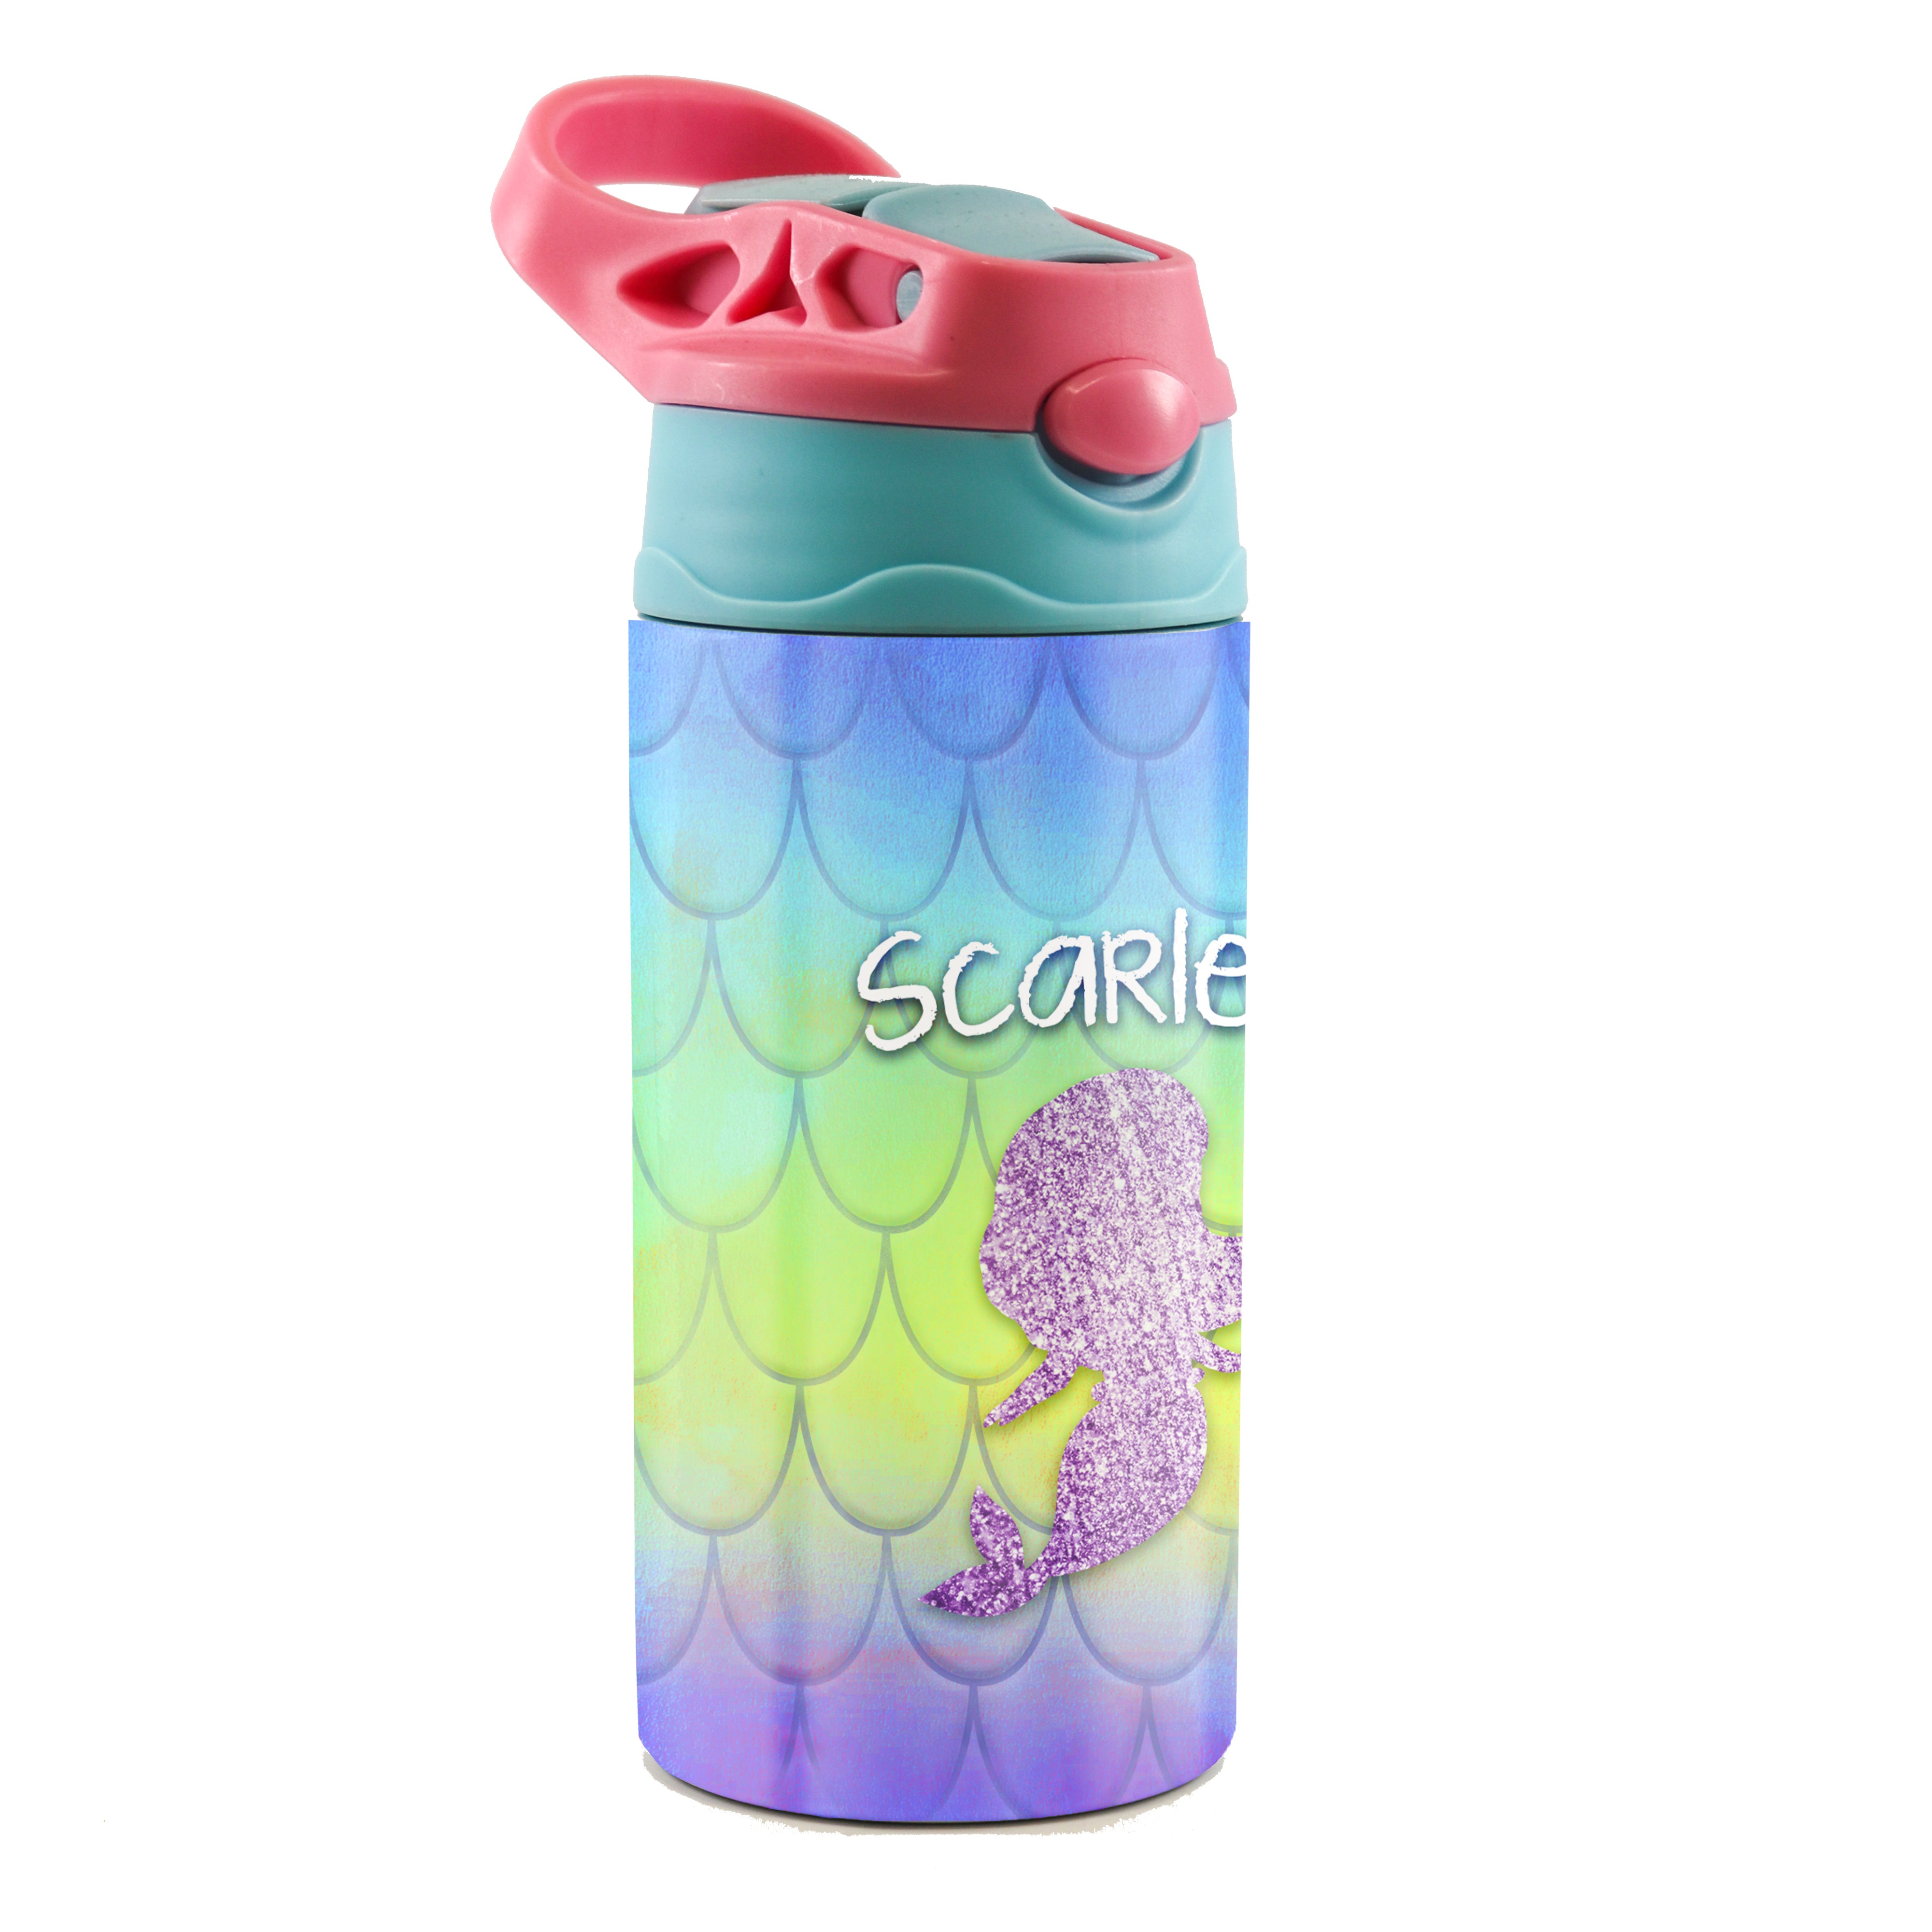 Trend Setters Original (Mermaid Scales - Personalize with Name) 12 oz Stainless Steel Water Bottle with Pink and Blue Lid